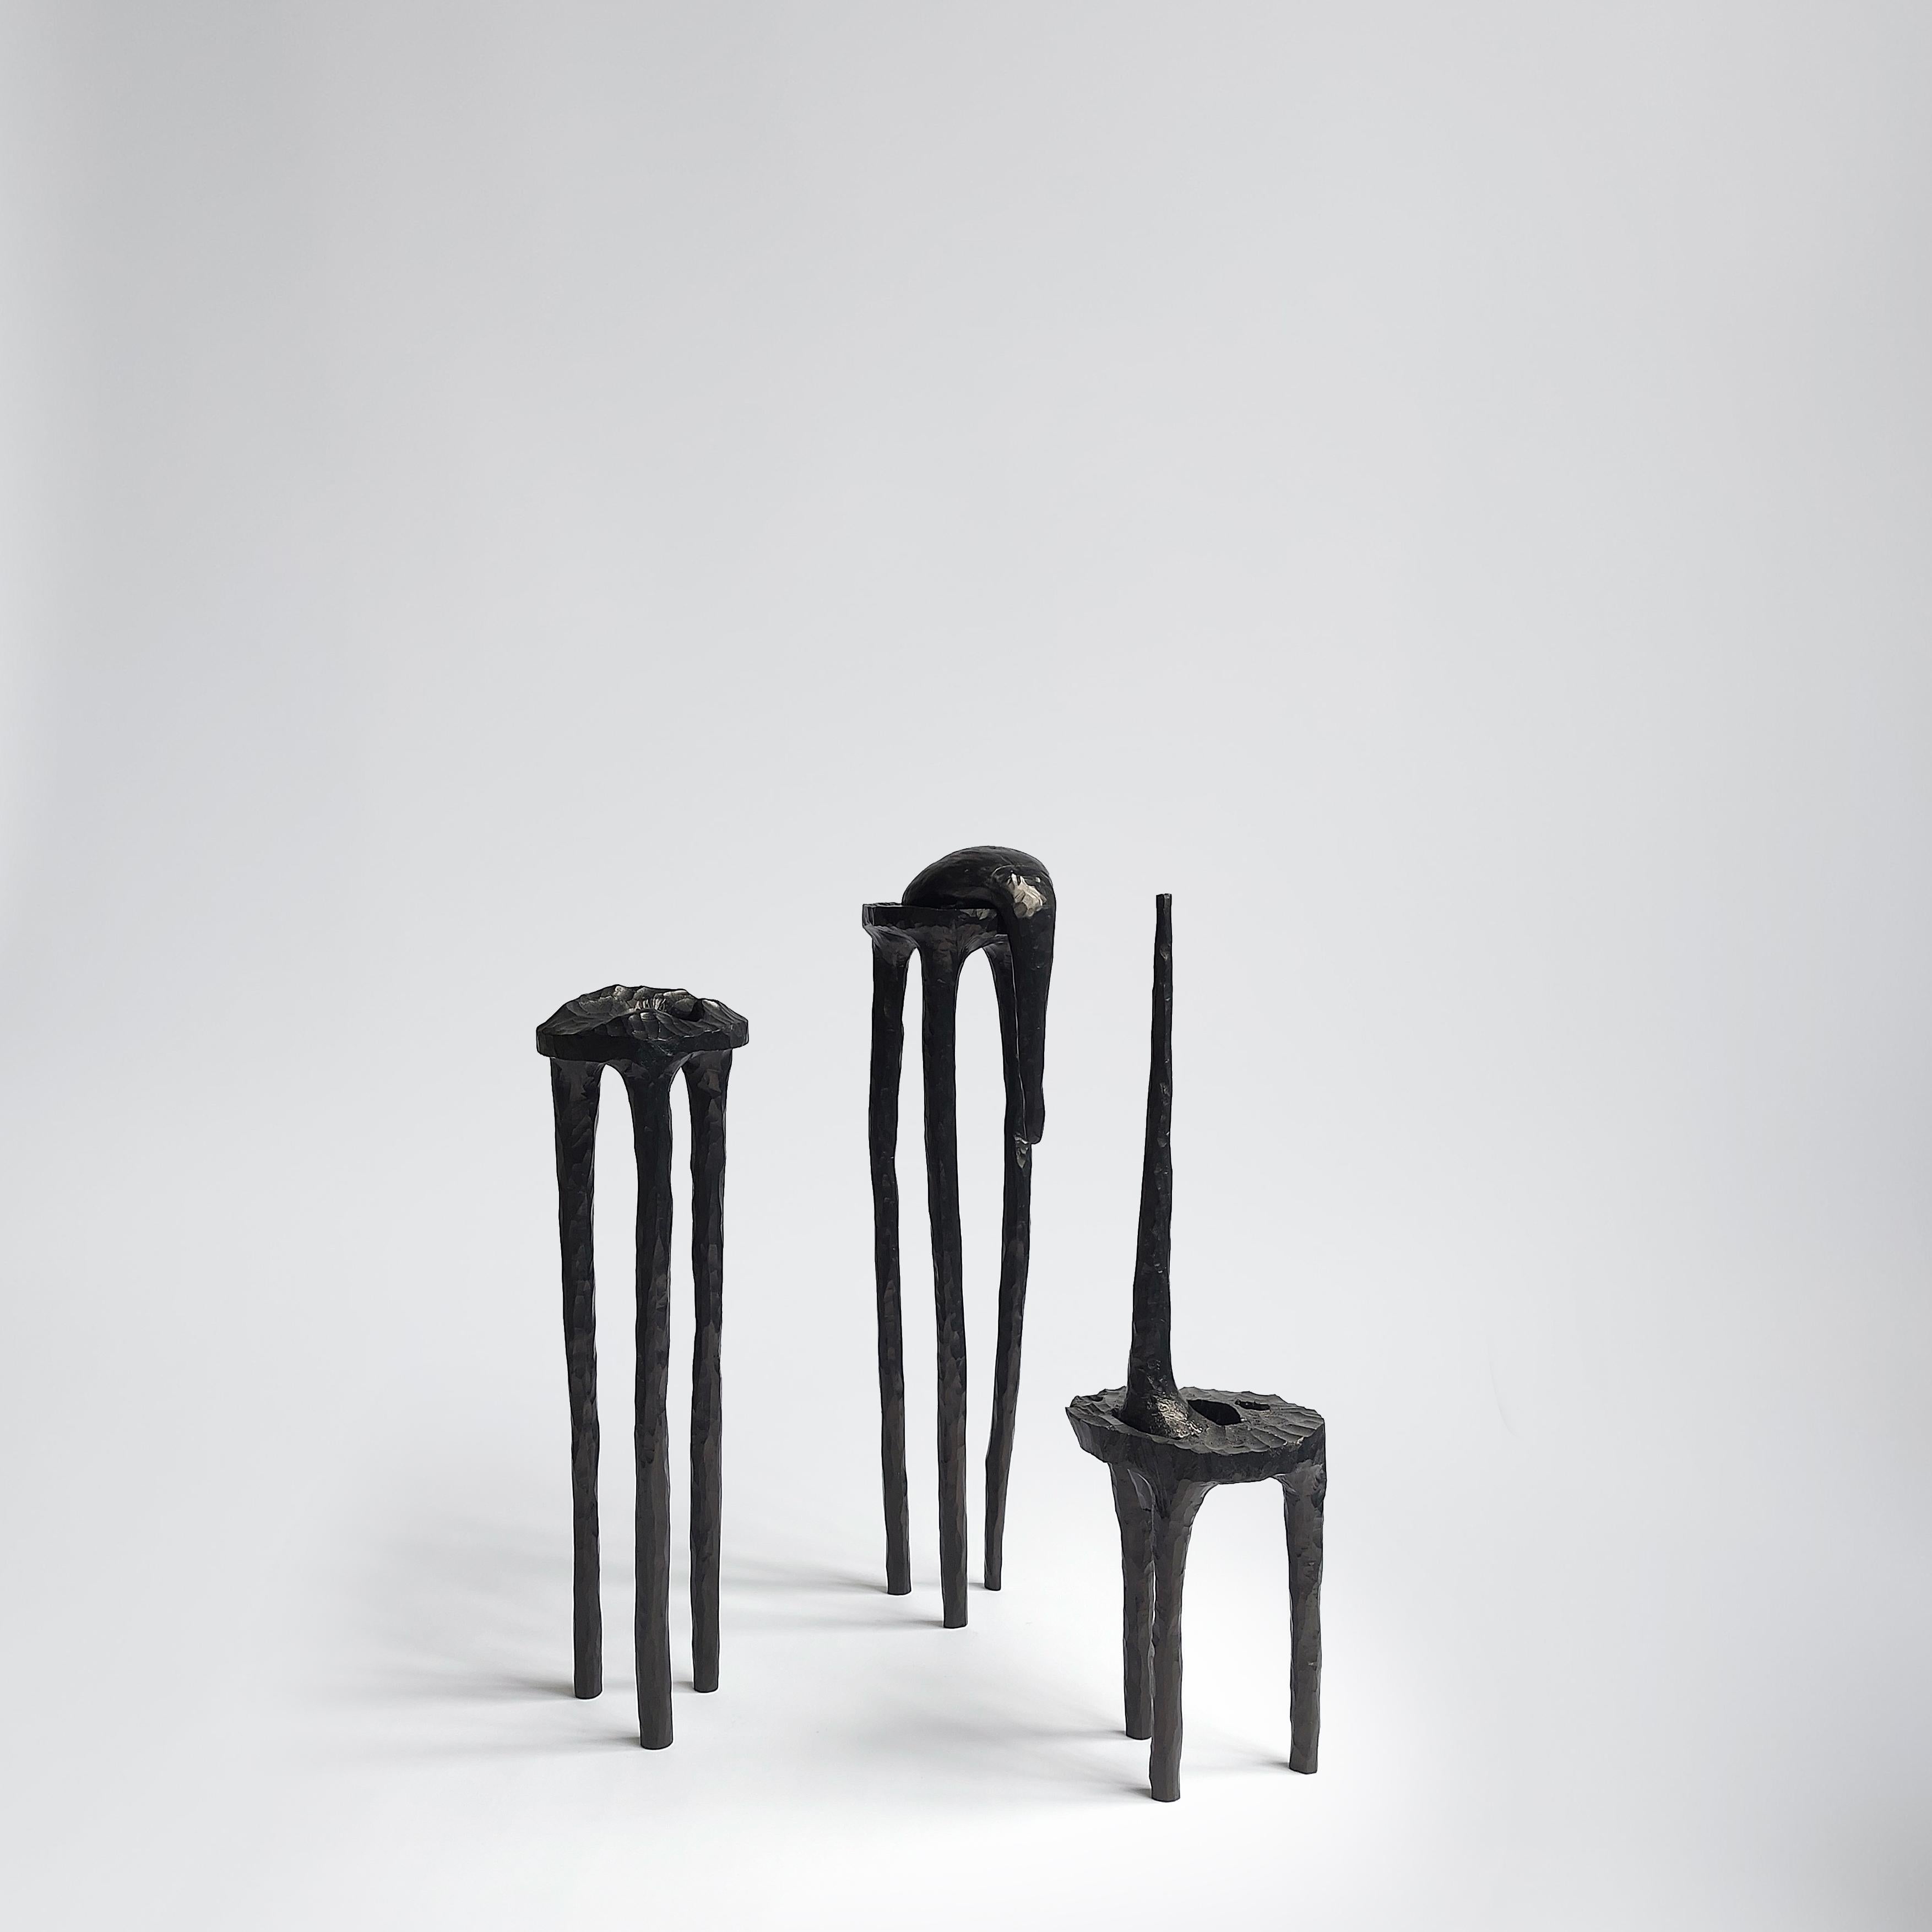 Set of 3 handemade objects by Henry D'ath.
Dimensions: D 15 x H 60 cm each.
Materials: wood, calligraphy ink.

Piece is handmade by artist.

Henry d’ath is a new zealand born, hong kong based artist and architect.
Using predominantly salvaged